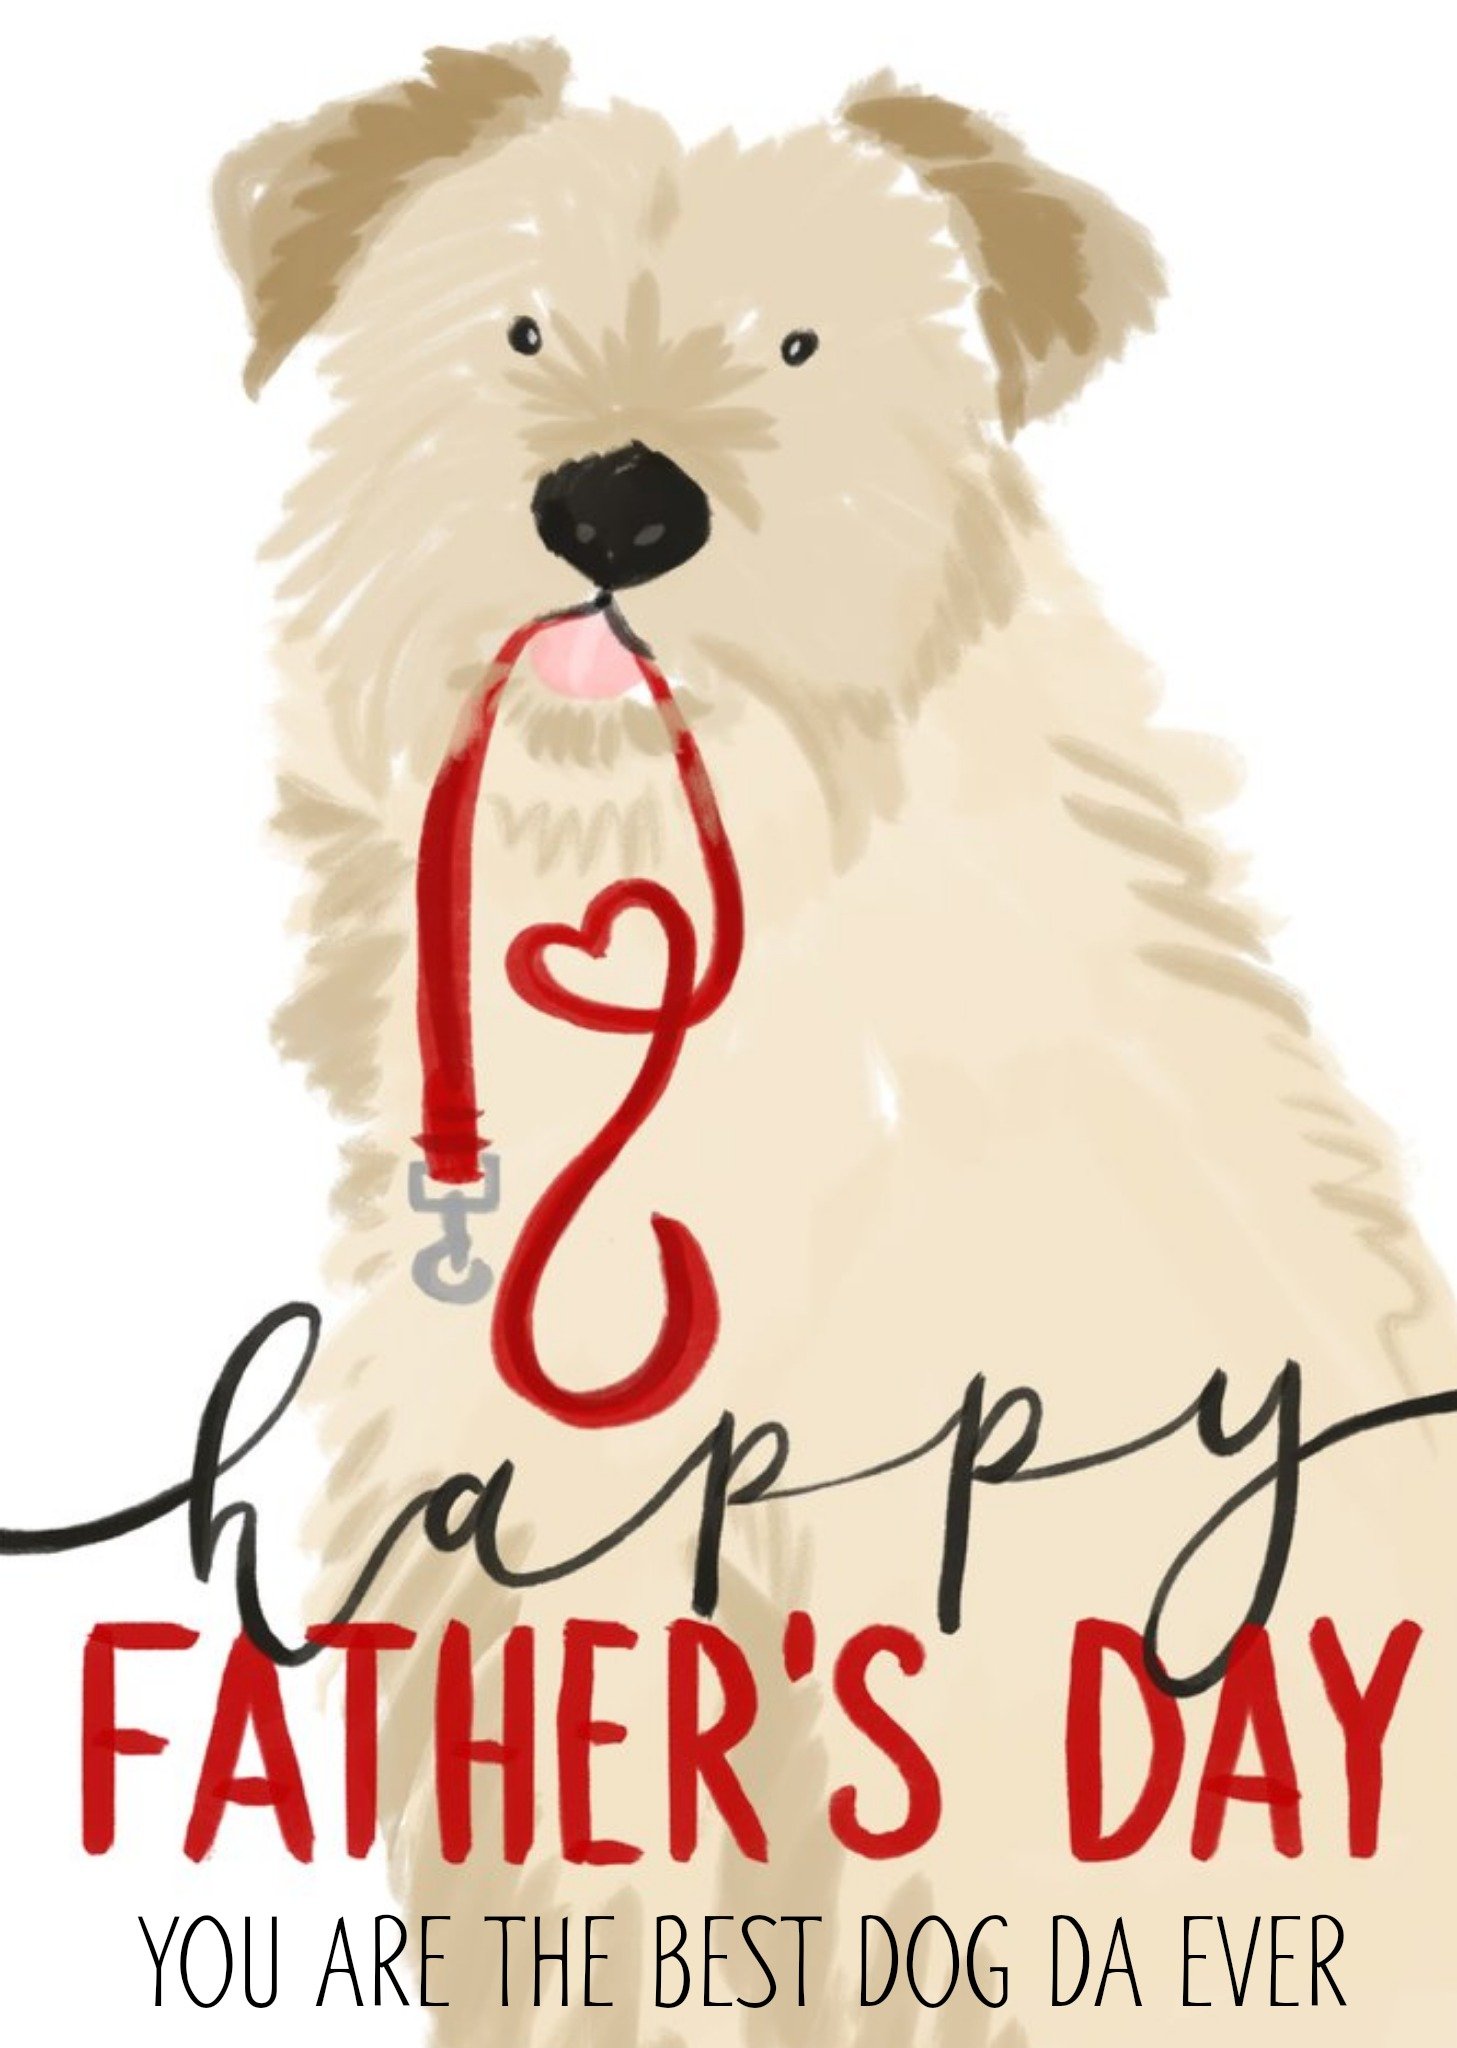 Moonpig Okey Dokey Design Illustrated You Are The Best Dog Da Ever Father's Day Card, Standard